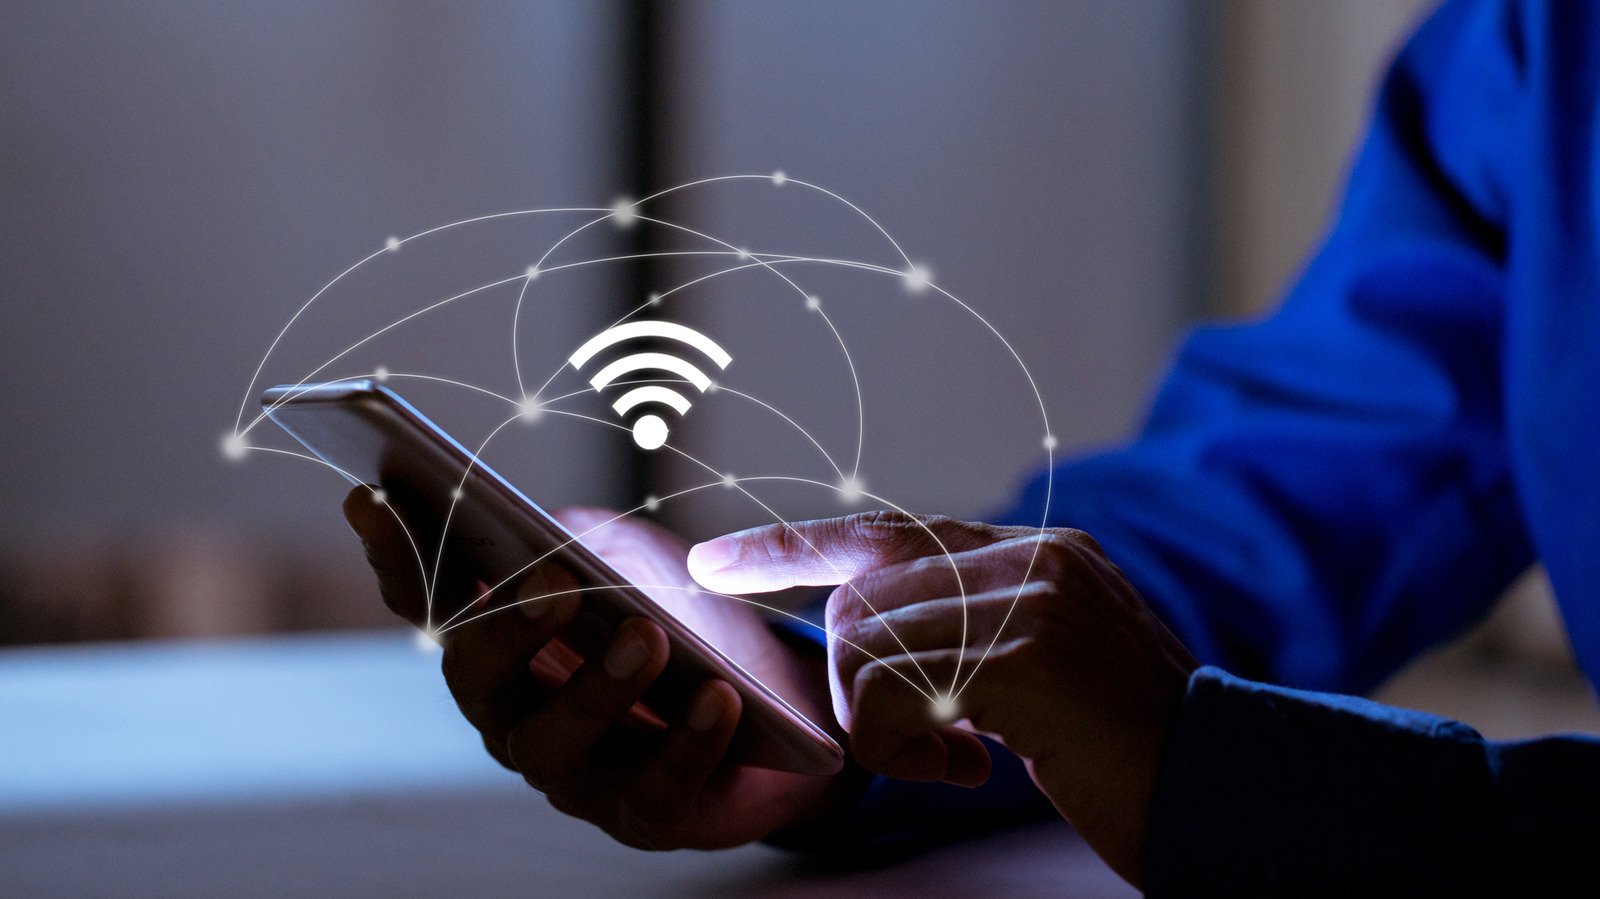 The Best Tips To Find Free Wi-Fi No Matter Where You Are